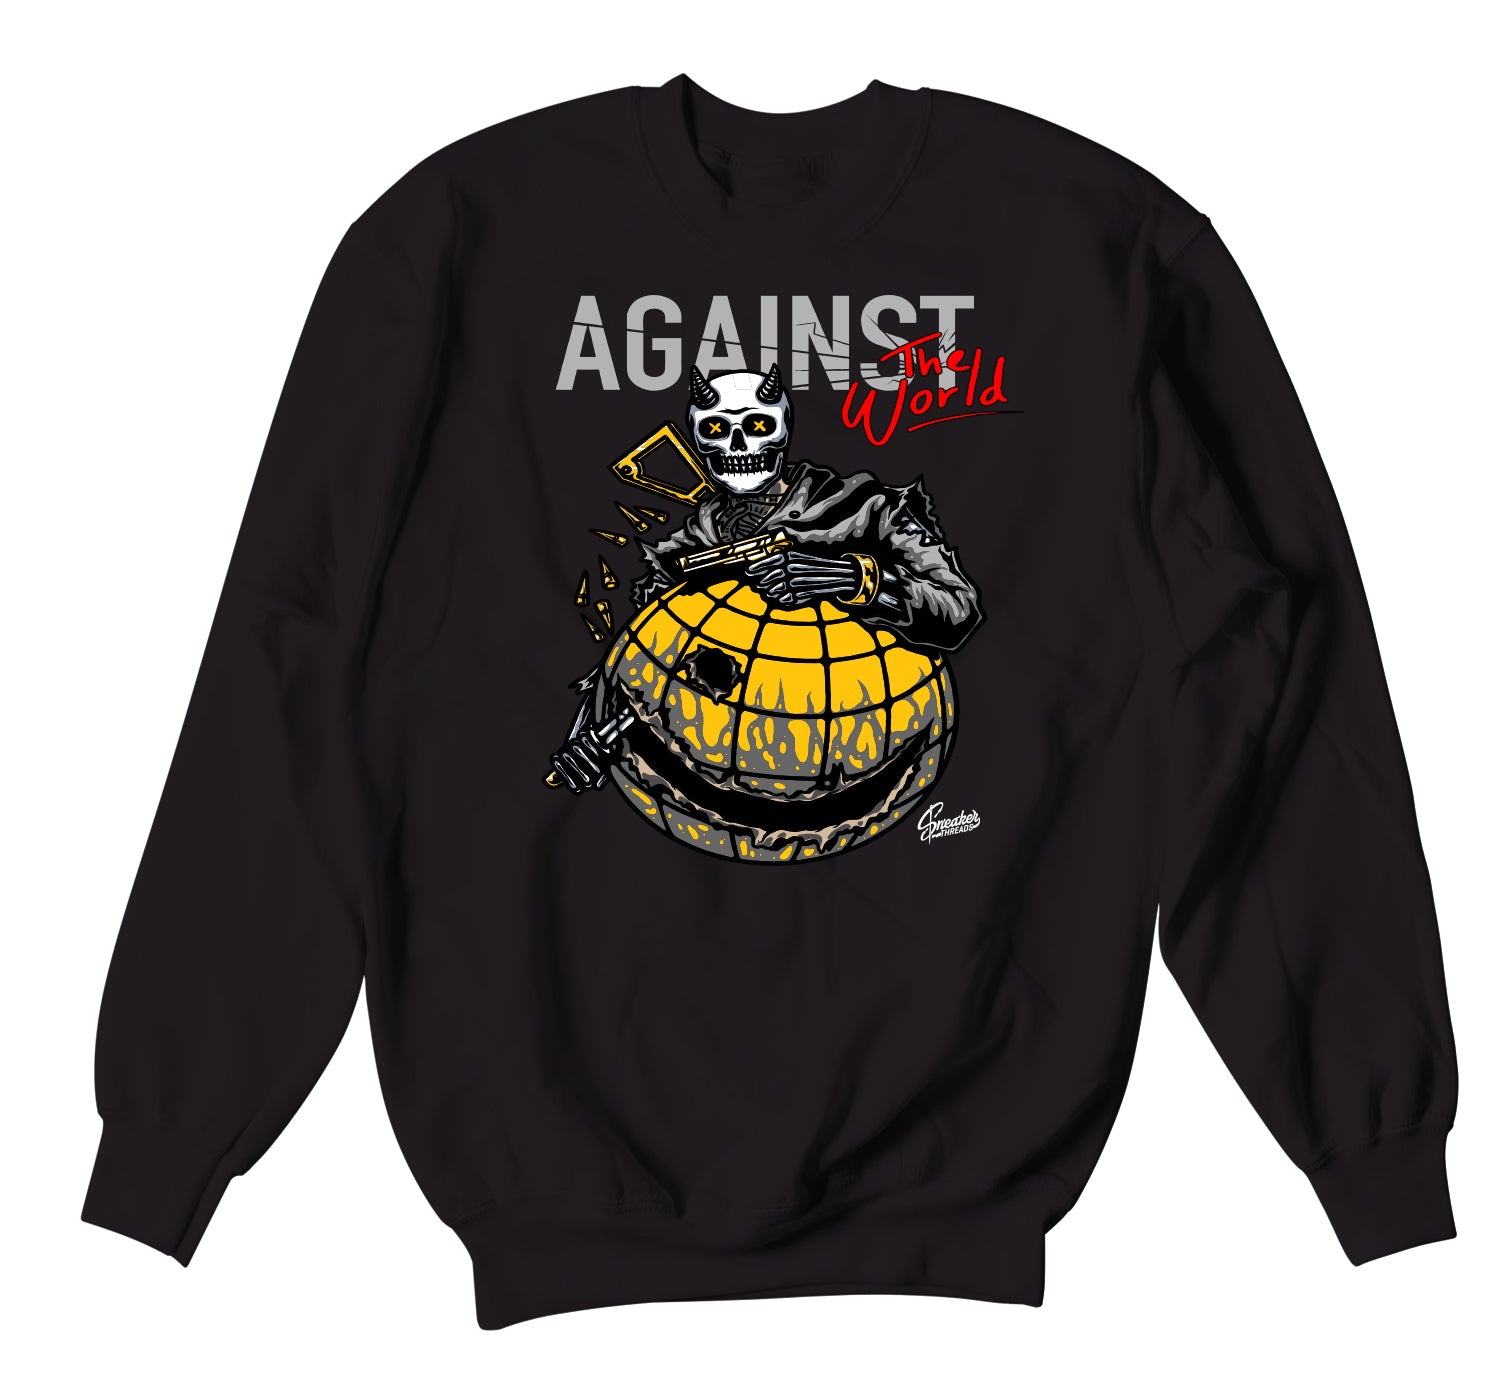 Retro 3 Cool Grey Sweater - Against The World - Black